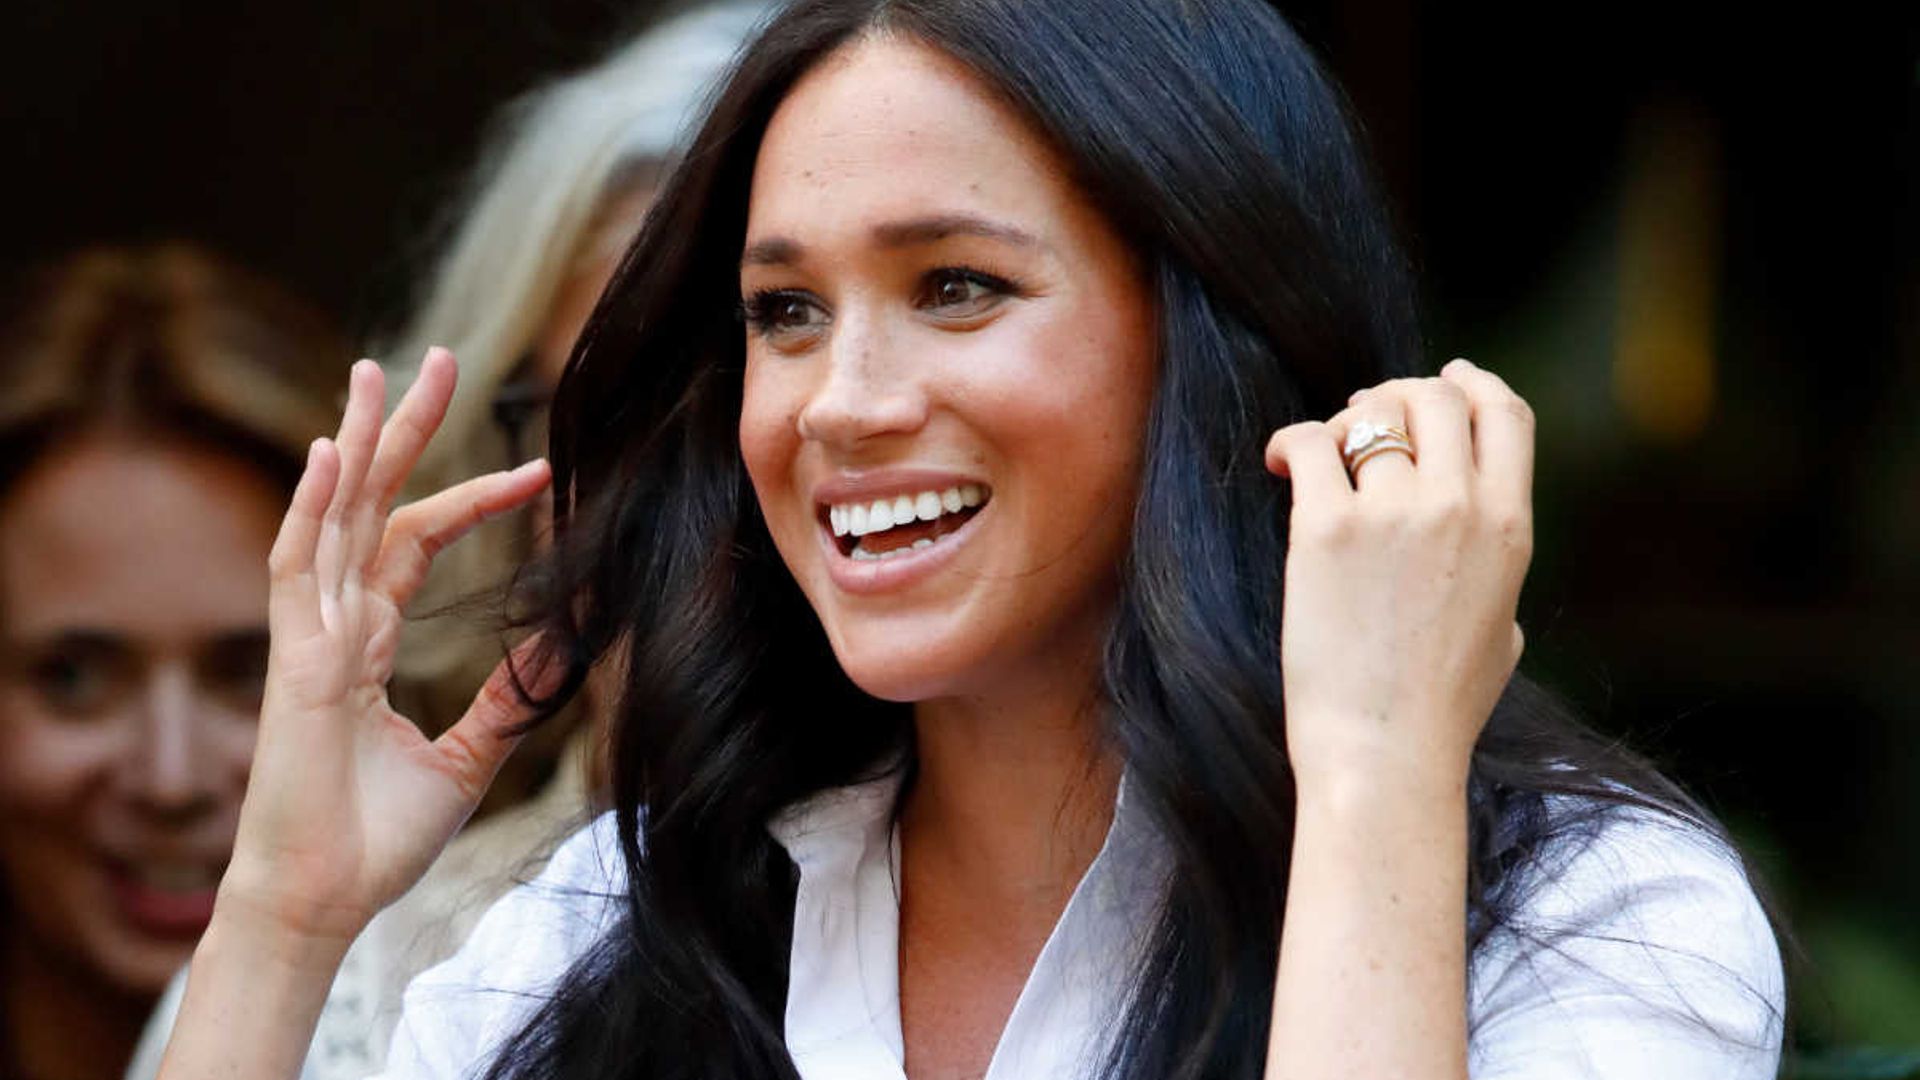 Meghan Markle's chic leather belt is on sale at Zappos for just $59.99